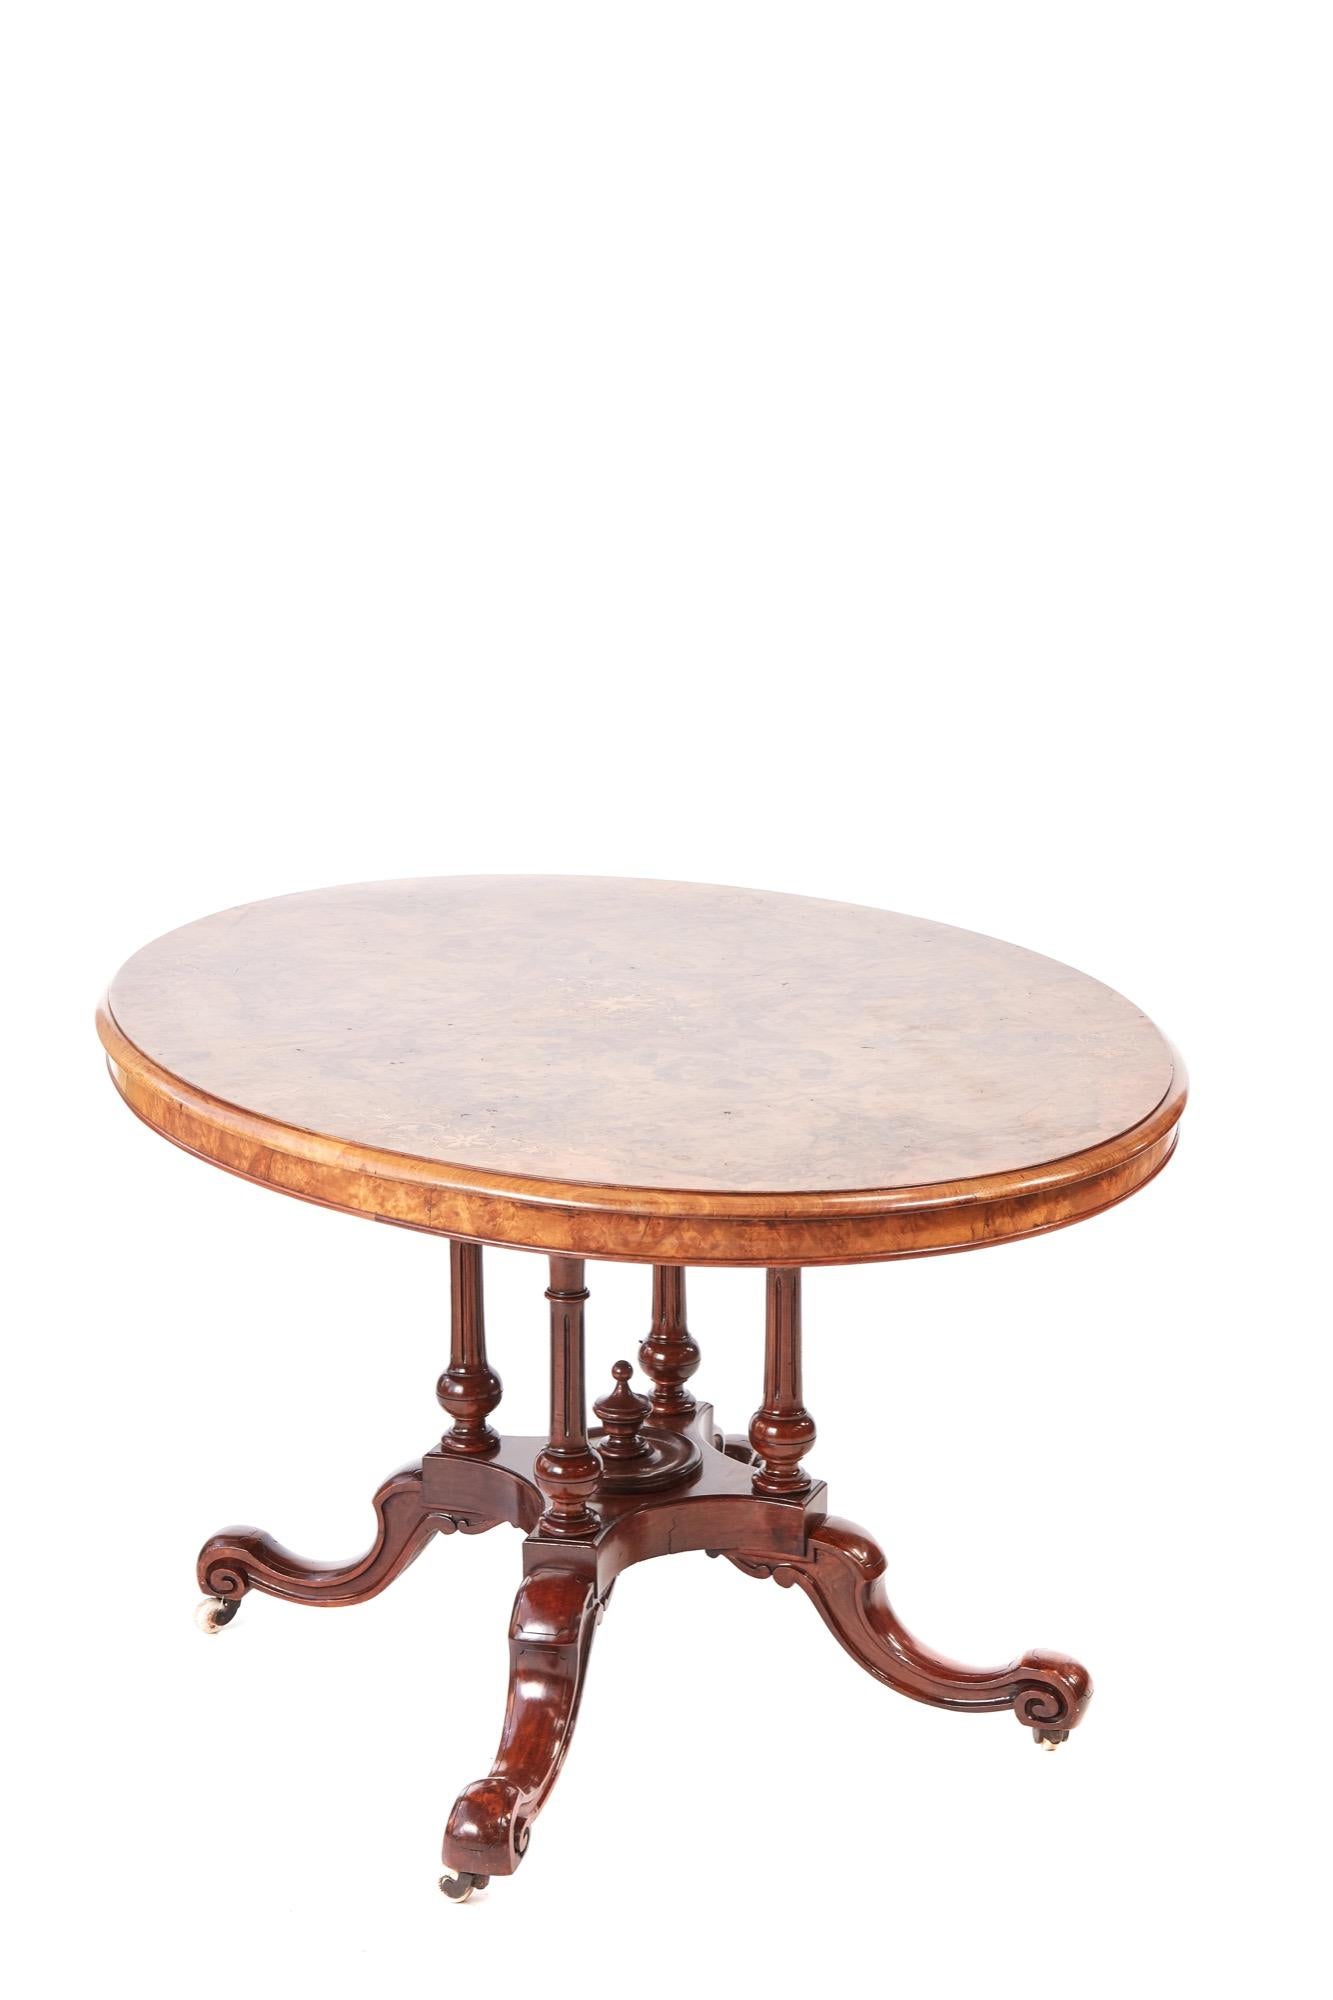 Fine quality victorian oval burr walnut inlaid centre table,having a oval burr walnut top inlaid with satinwood and a thumb moulded edge supported by a quality solid walnut base consisting of four reeded columns,standing on four shaped cabriole legs